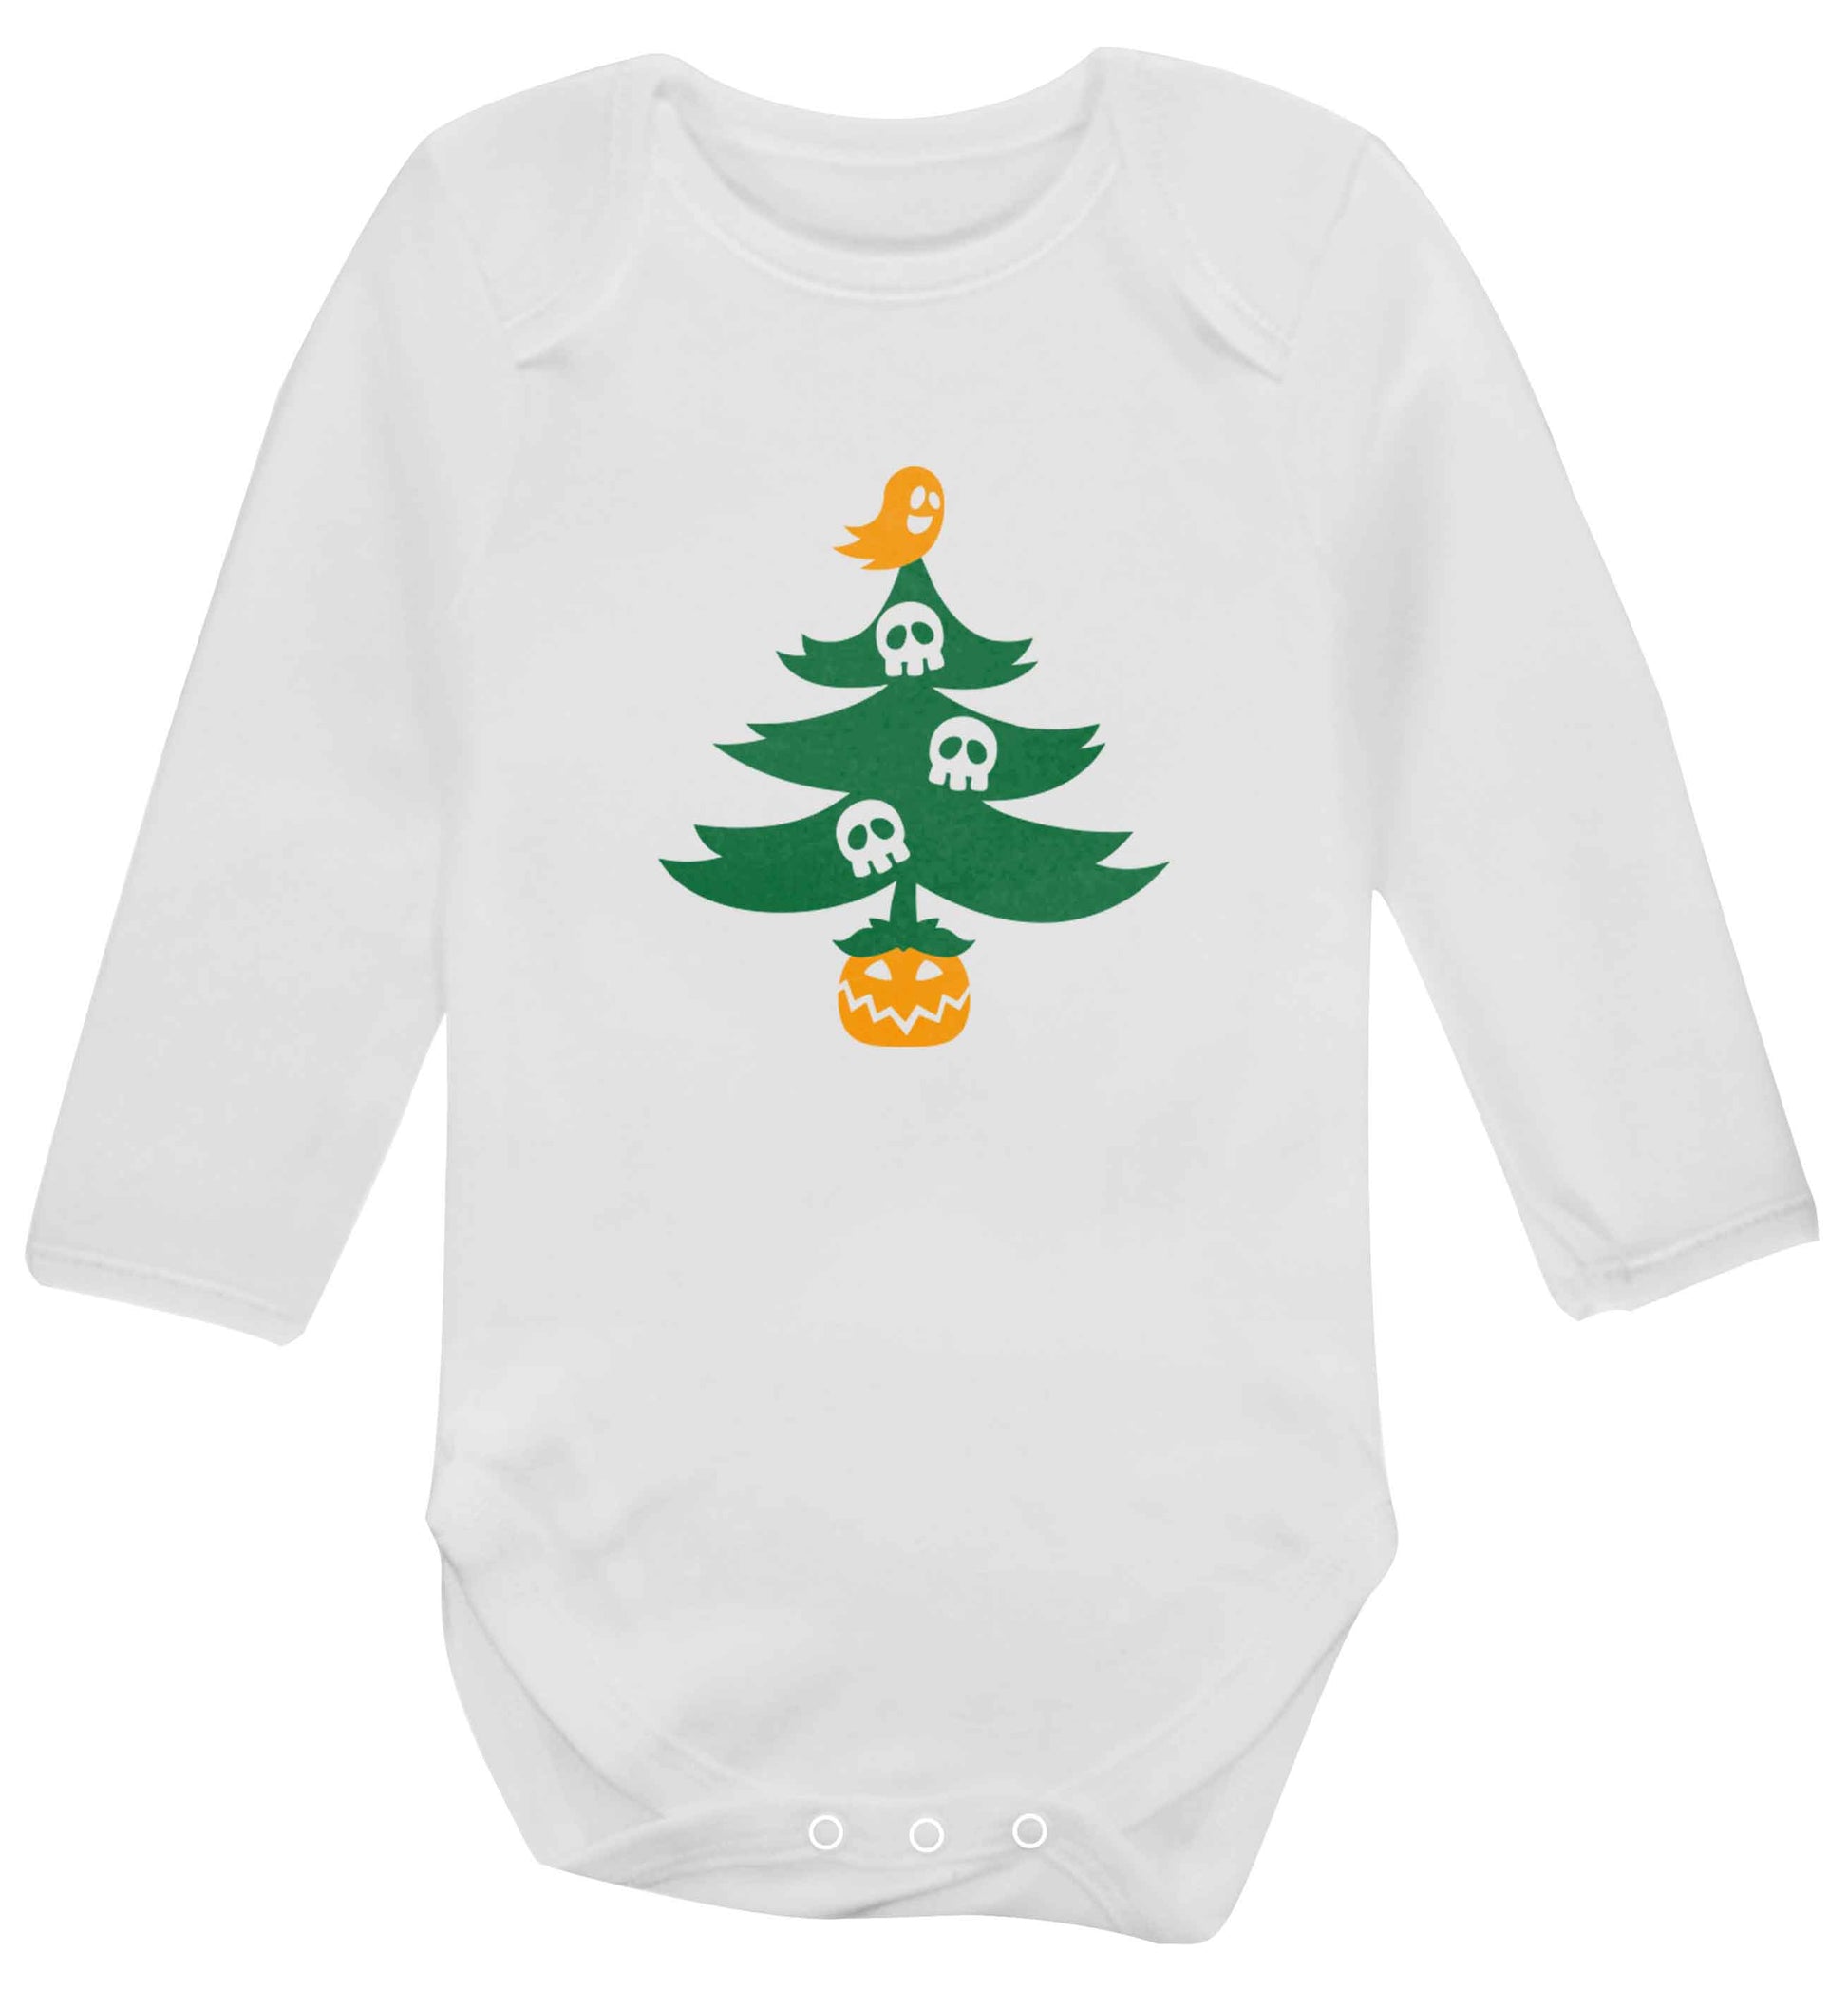 Halloween Christmas tree baby vest long sleeved white 6-12 months